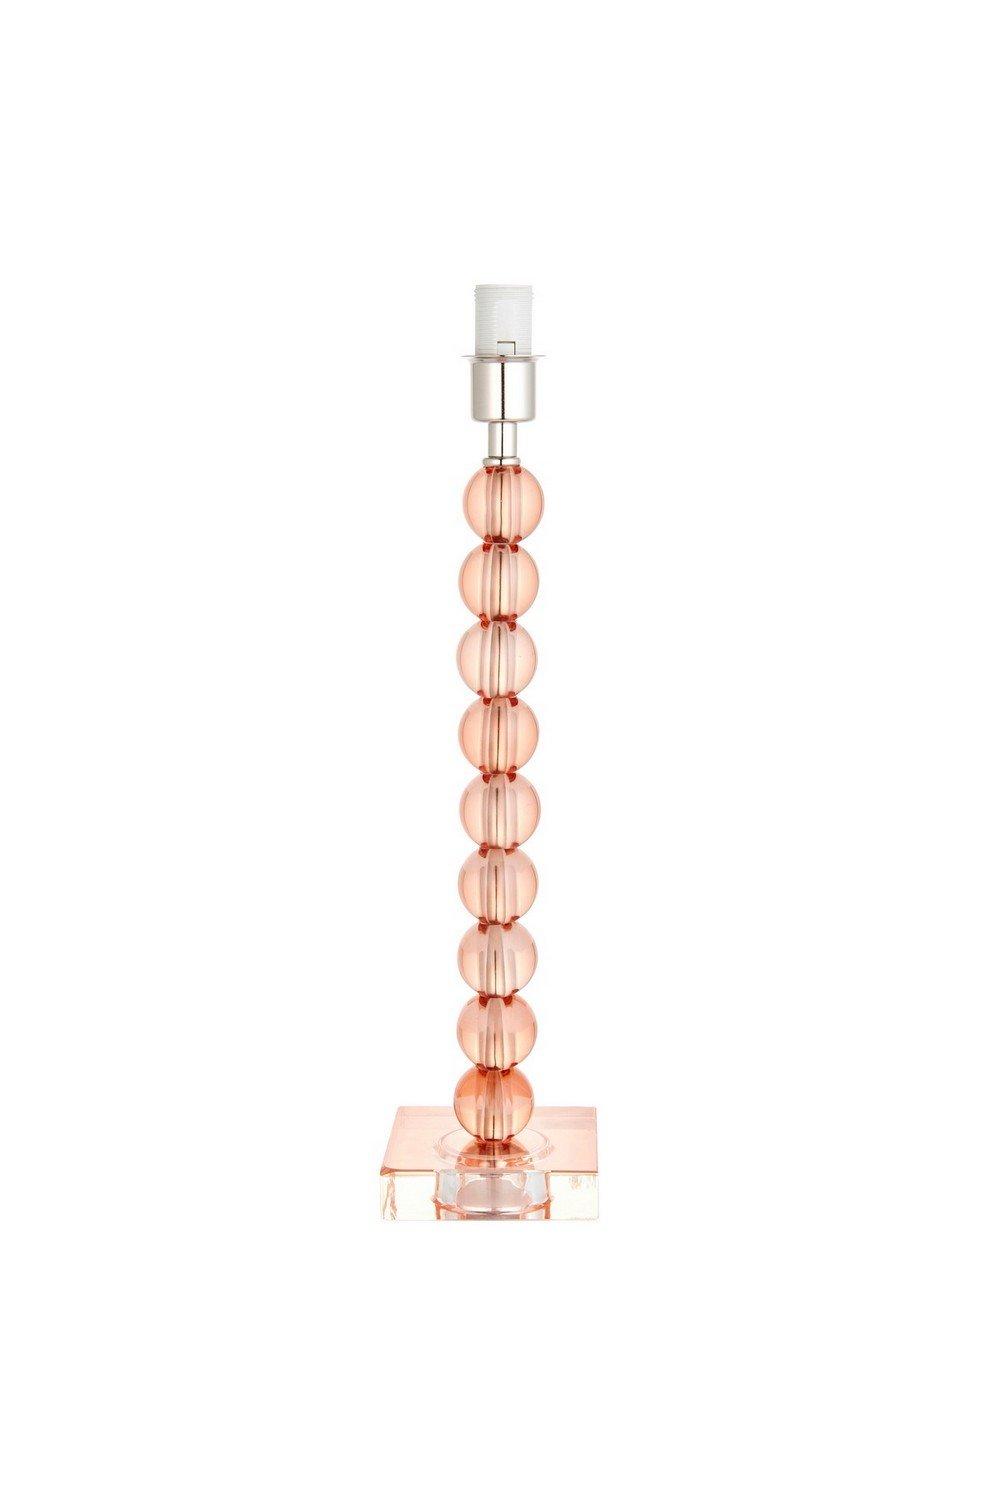 Adelie Base Only Table Lamp Blush Crystal Glass Bright Nickel Plate